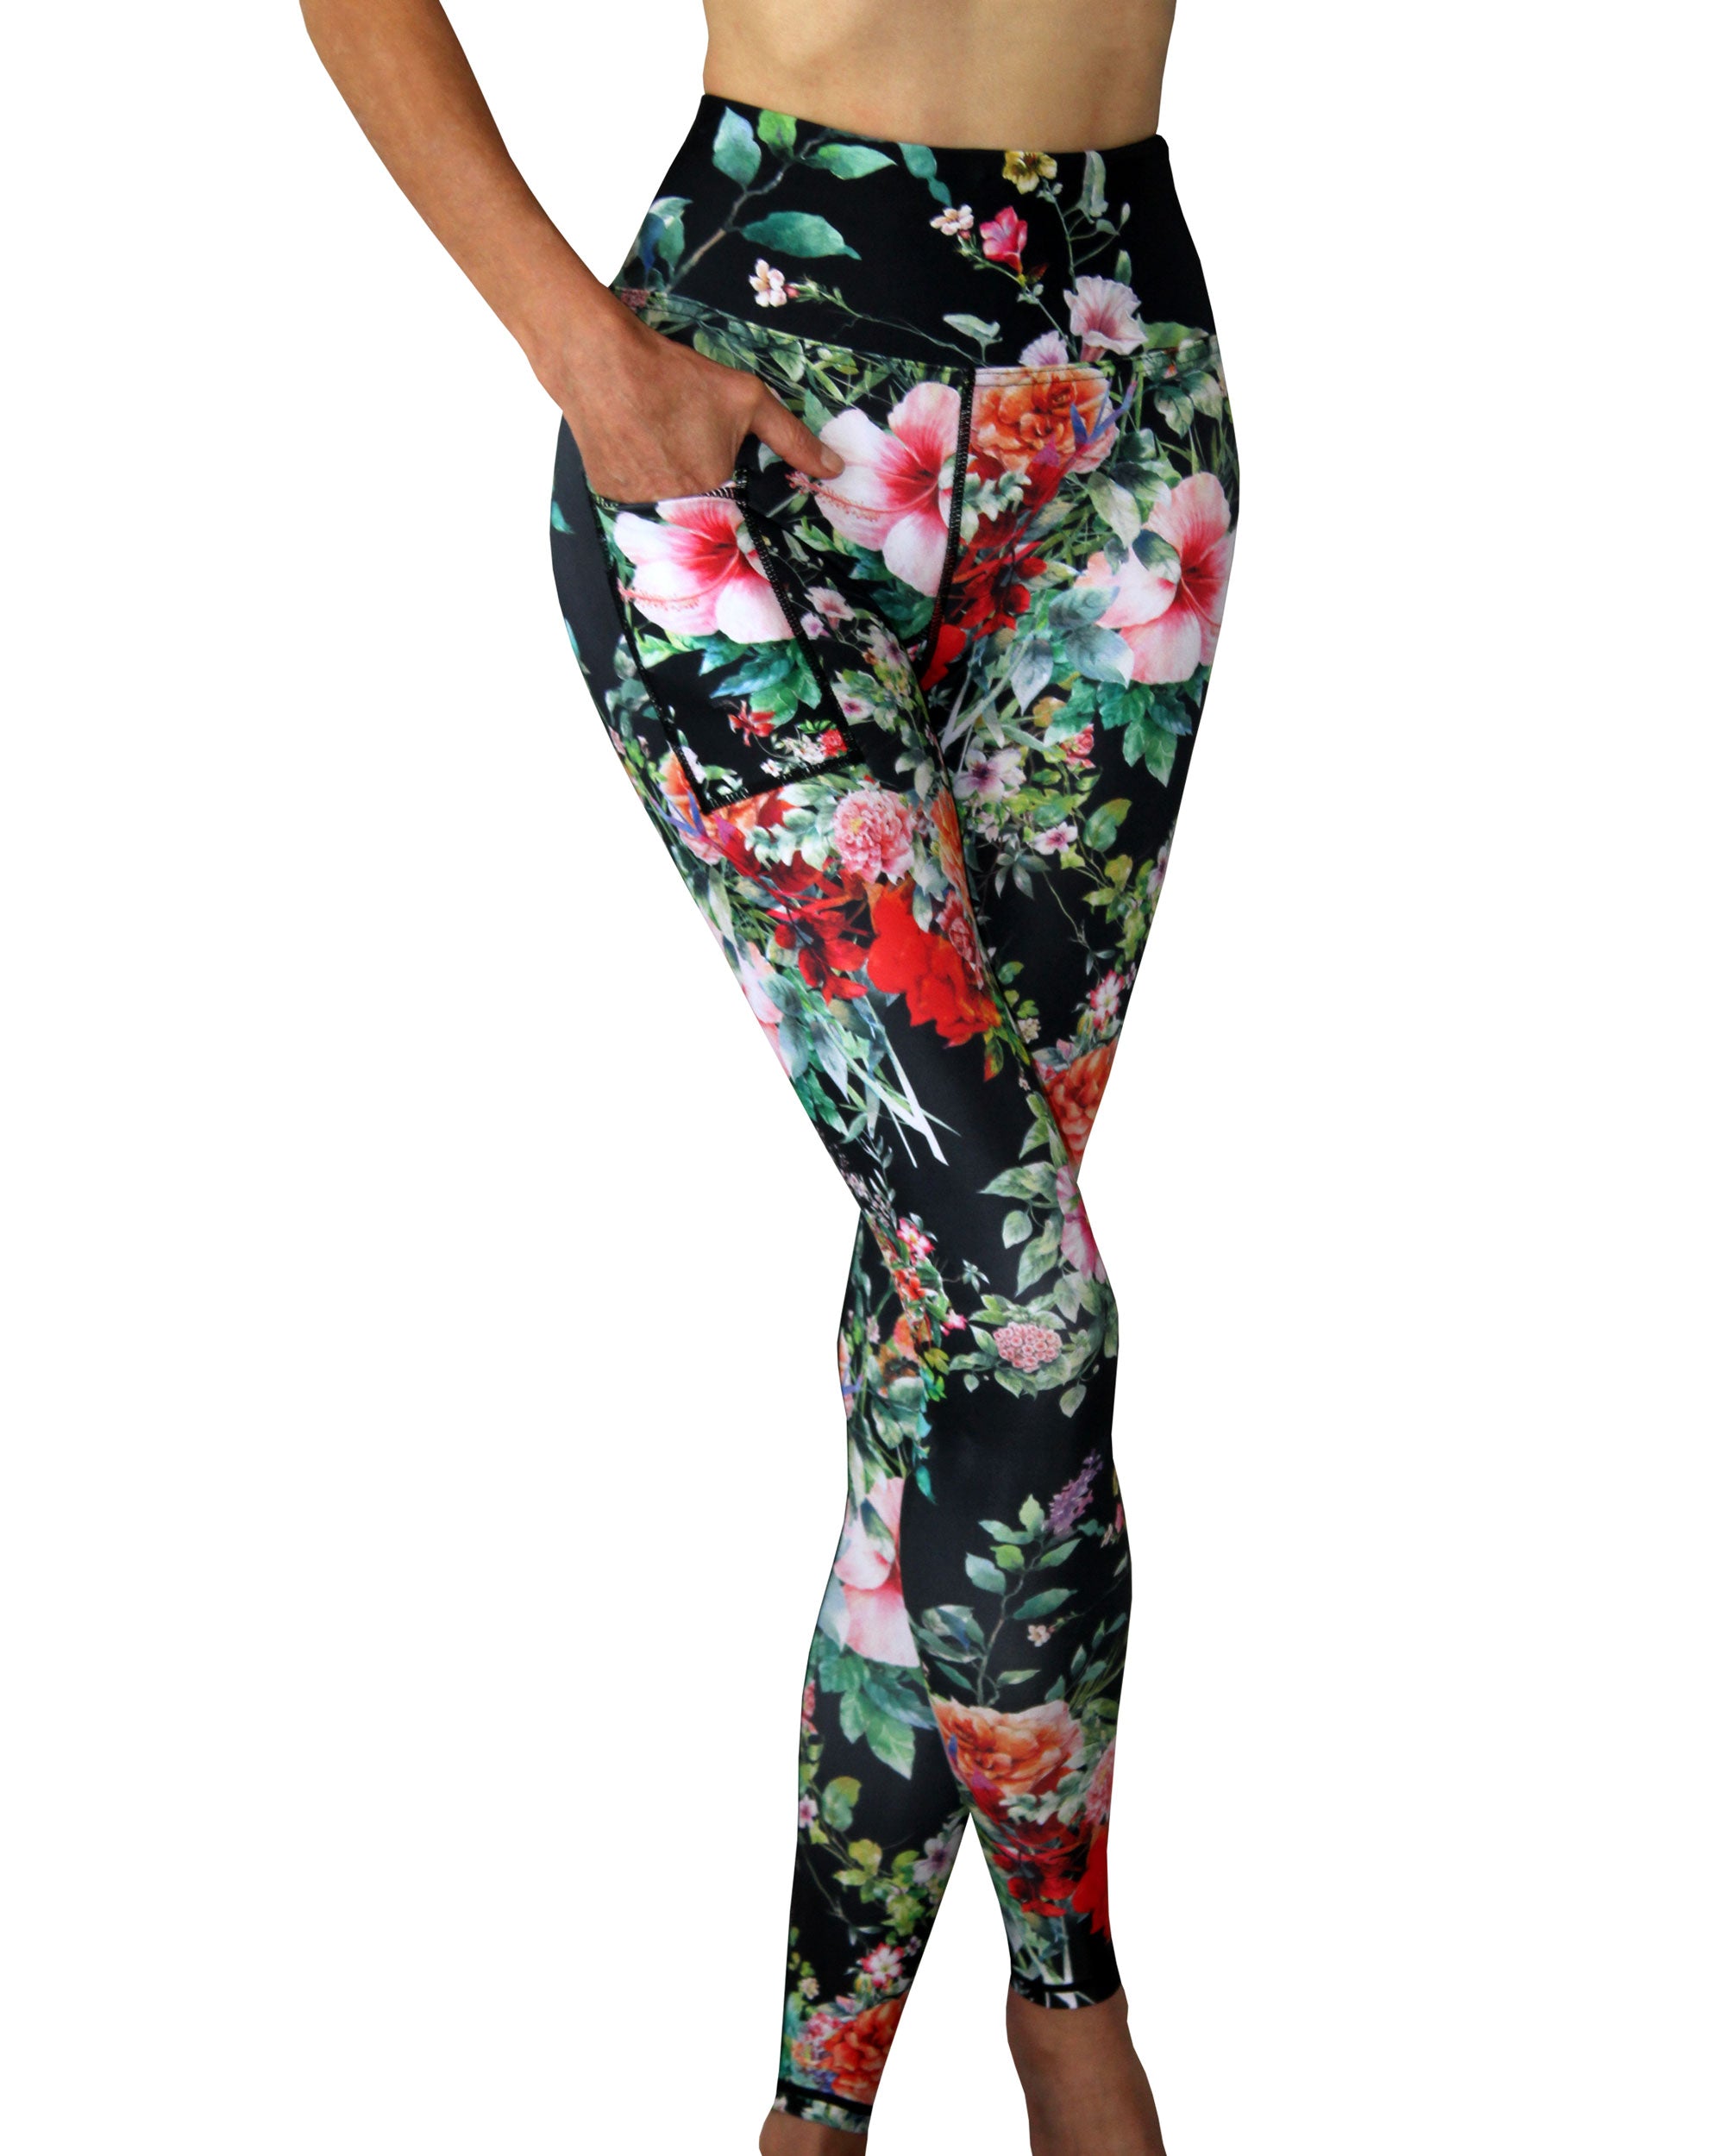 Vivolicious floral leggings for yoga and gym workouts, made in Cape Town South Africa.